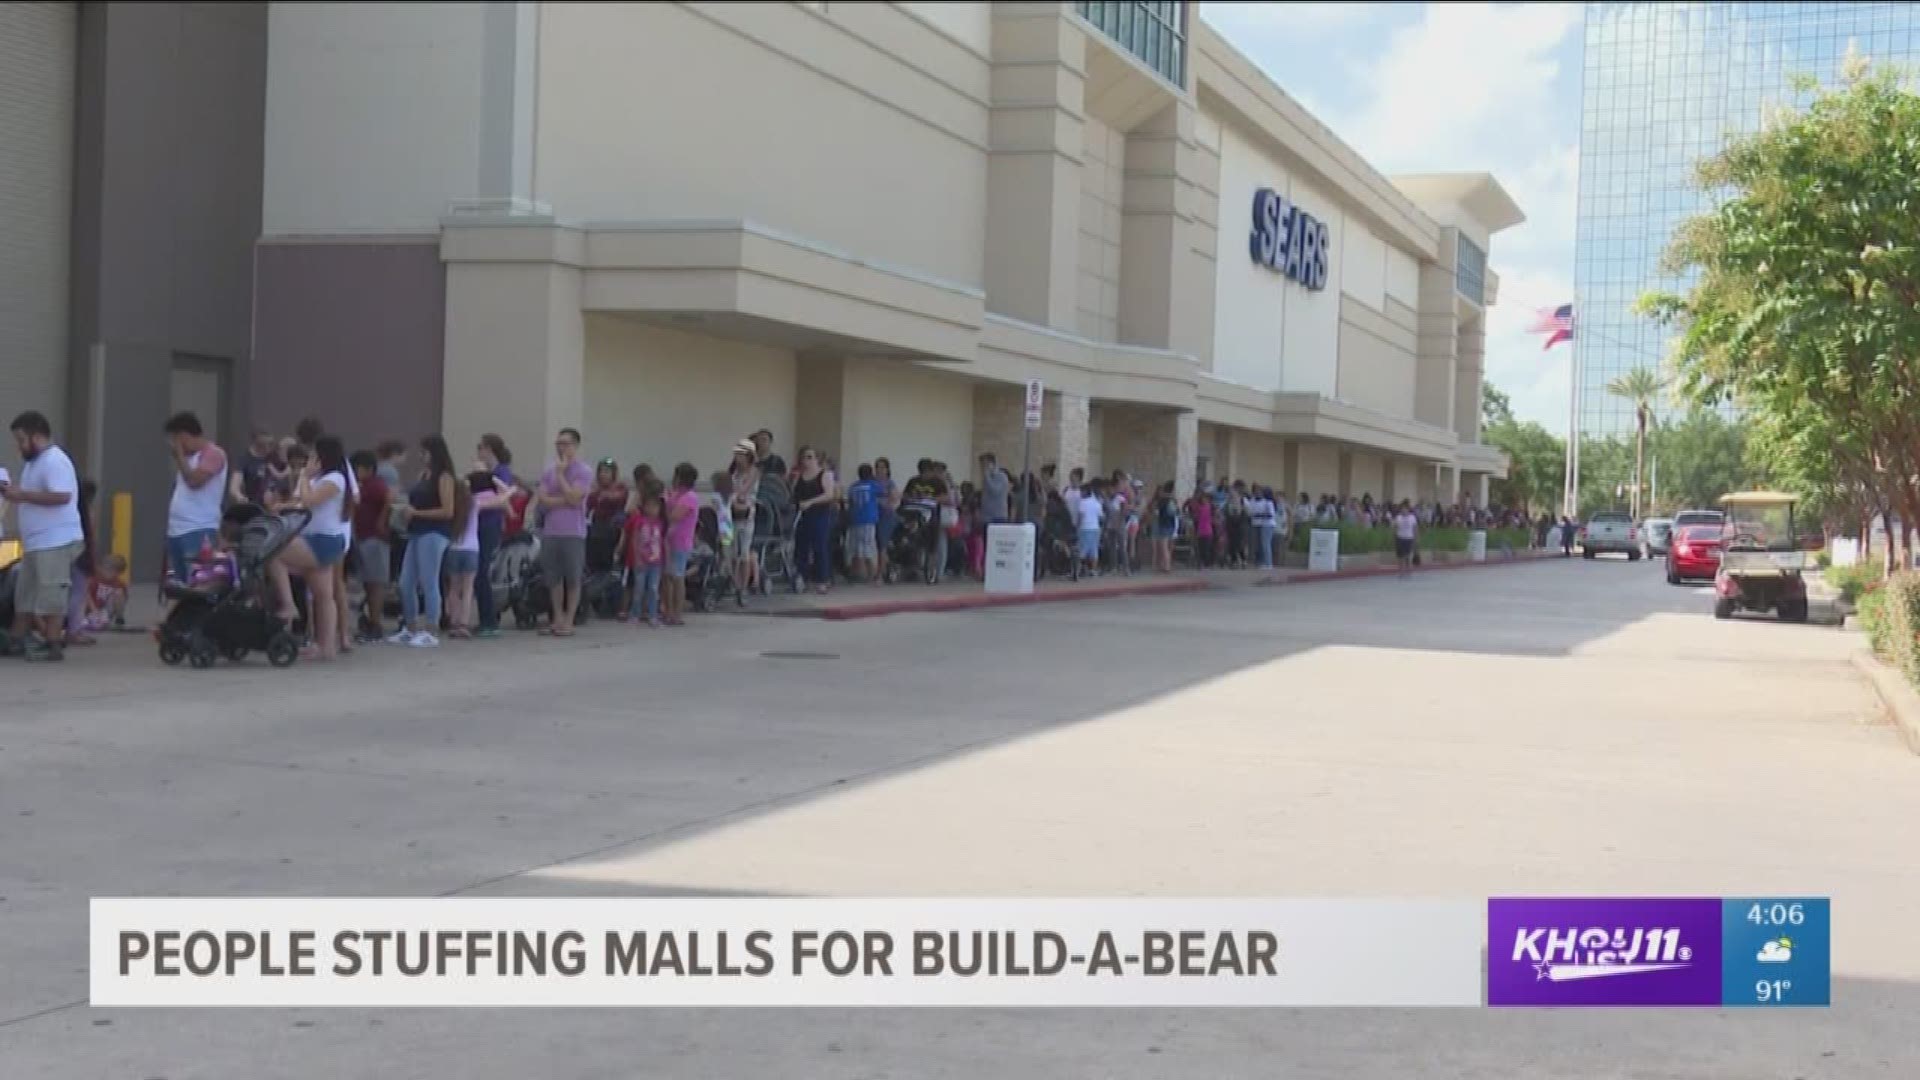 At Memorial City Mall, the huge turnout for the promotion  caught just about everyone off guard.  Hundreds lined up for hours to save money on the popular stuffed animals. A line a mile-long wrapped down and around dozens of stores, both inside and out.